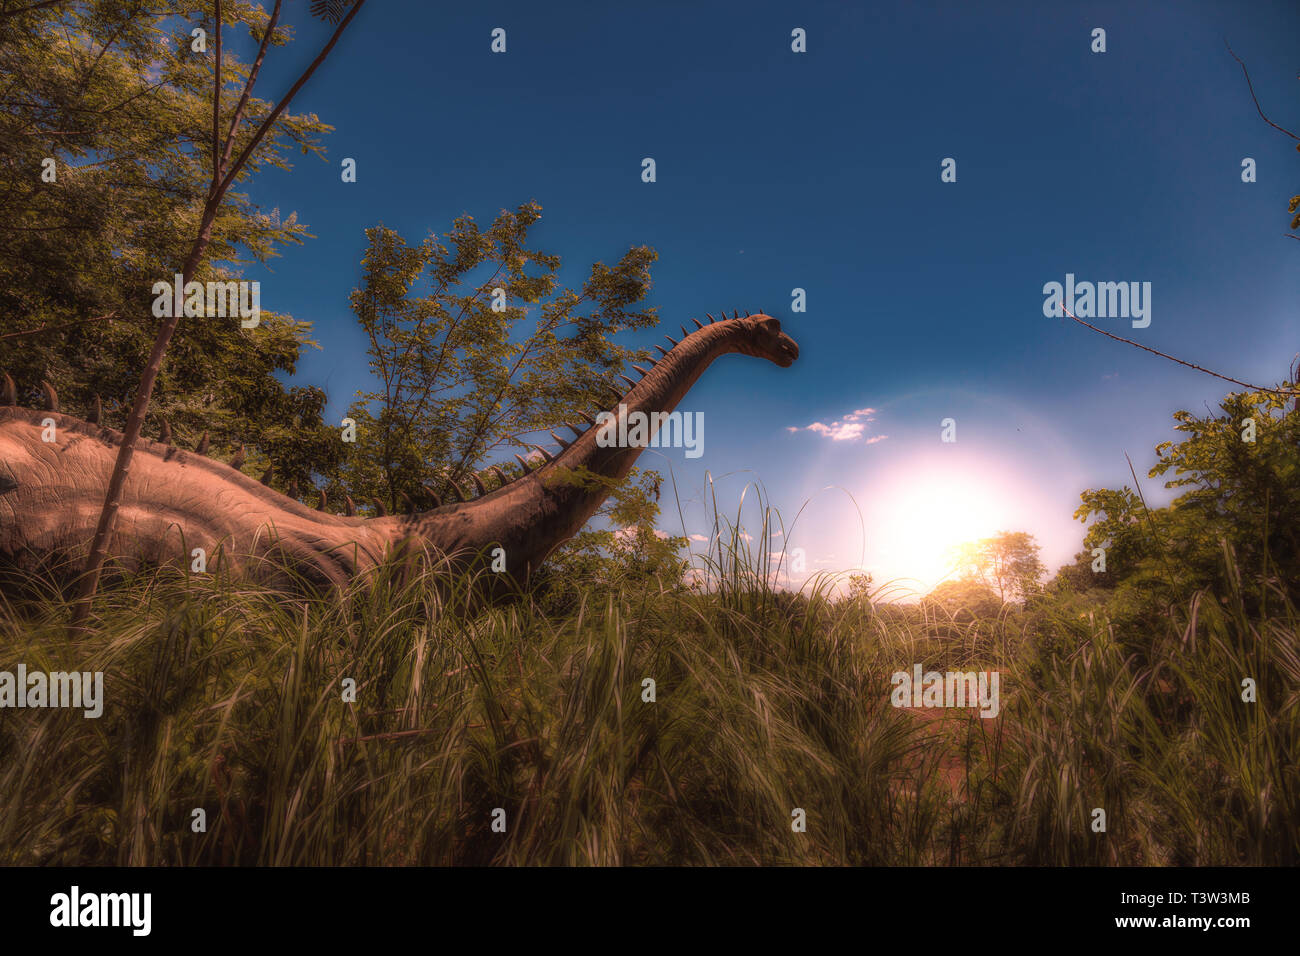 Dinosaur in Tall Grass at Sunrise - Photoshop Compositing Stock Photo